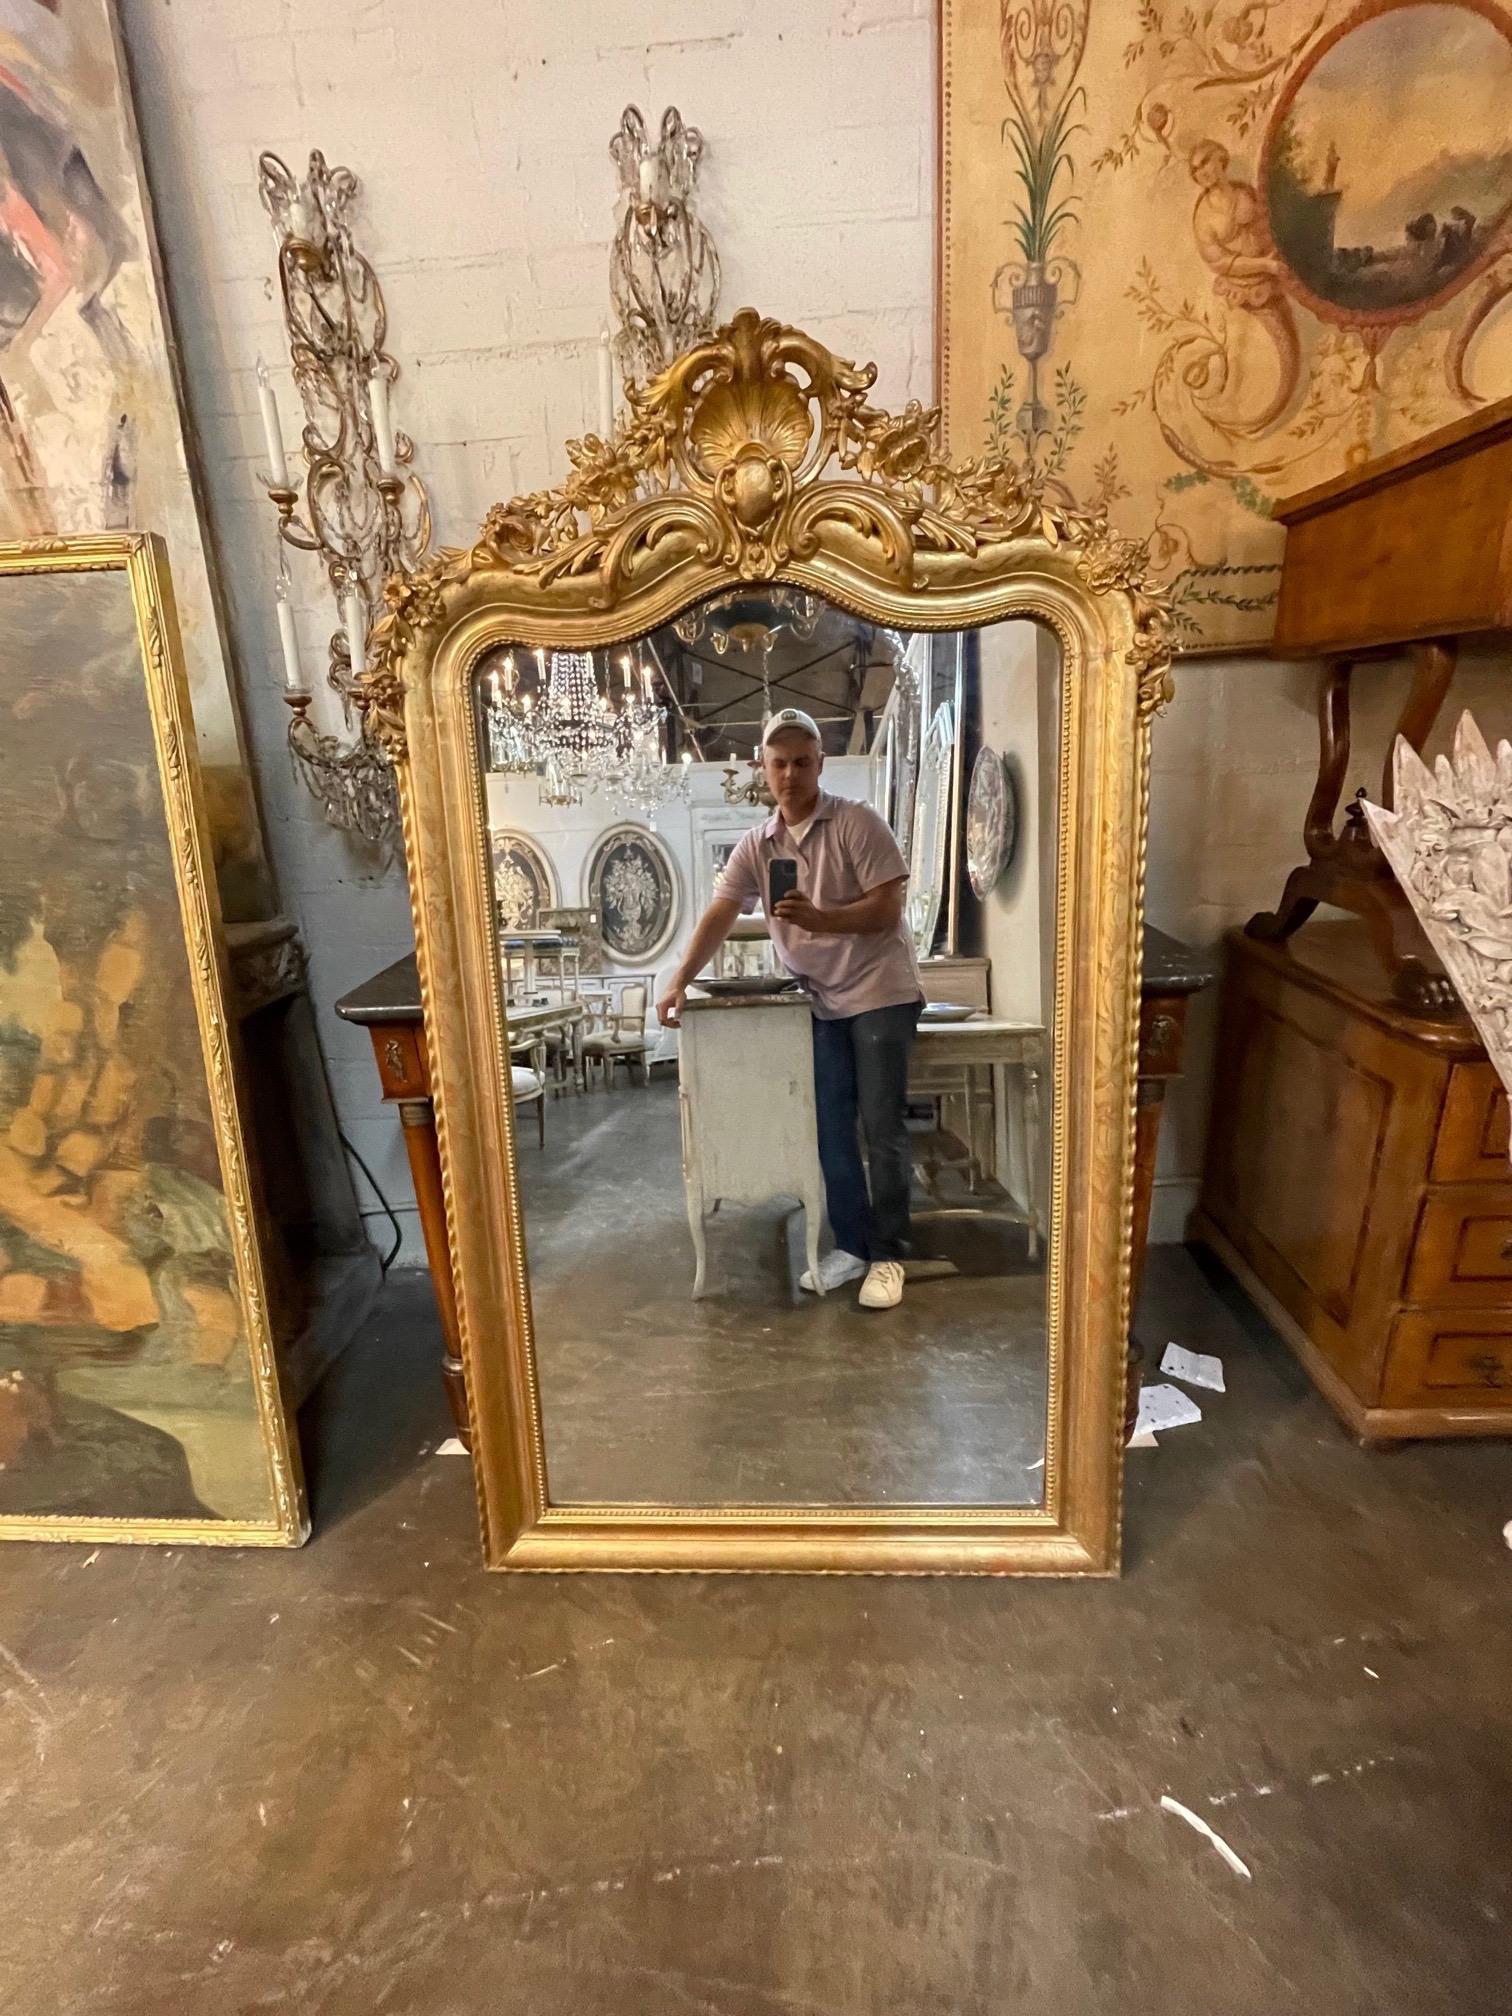 Lovely 19th century gold Louis Phillipe mirror. This piece has a beautiful patina as well as a beautiful crest and flowers at the top. Very elegant!!.